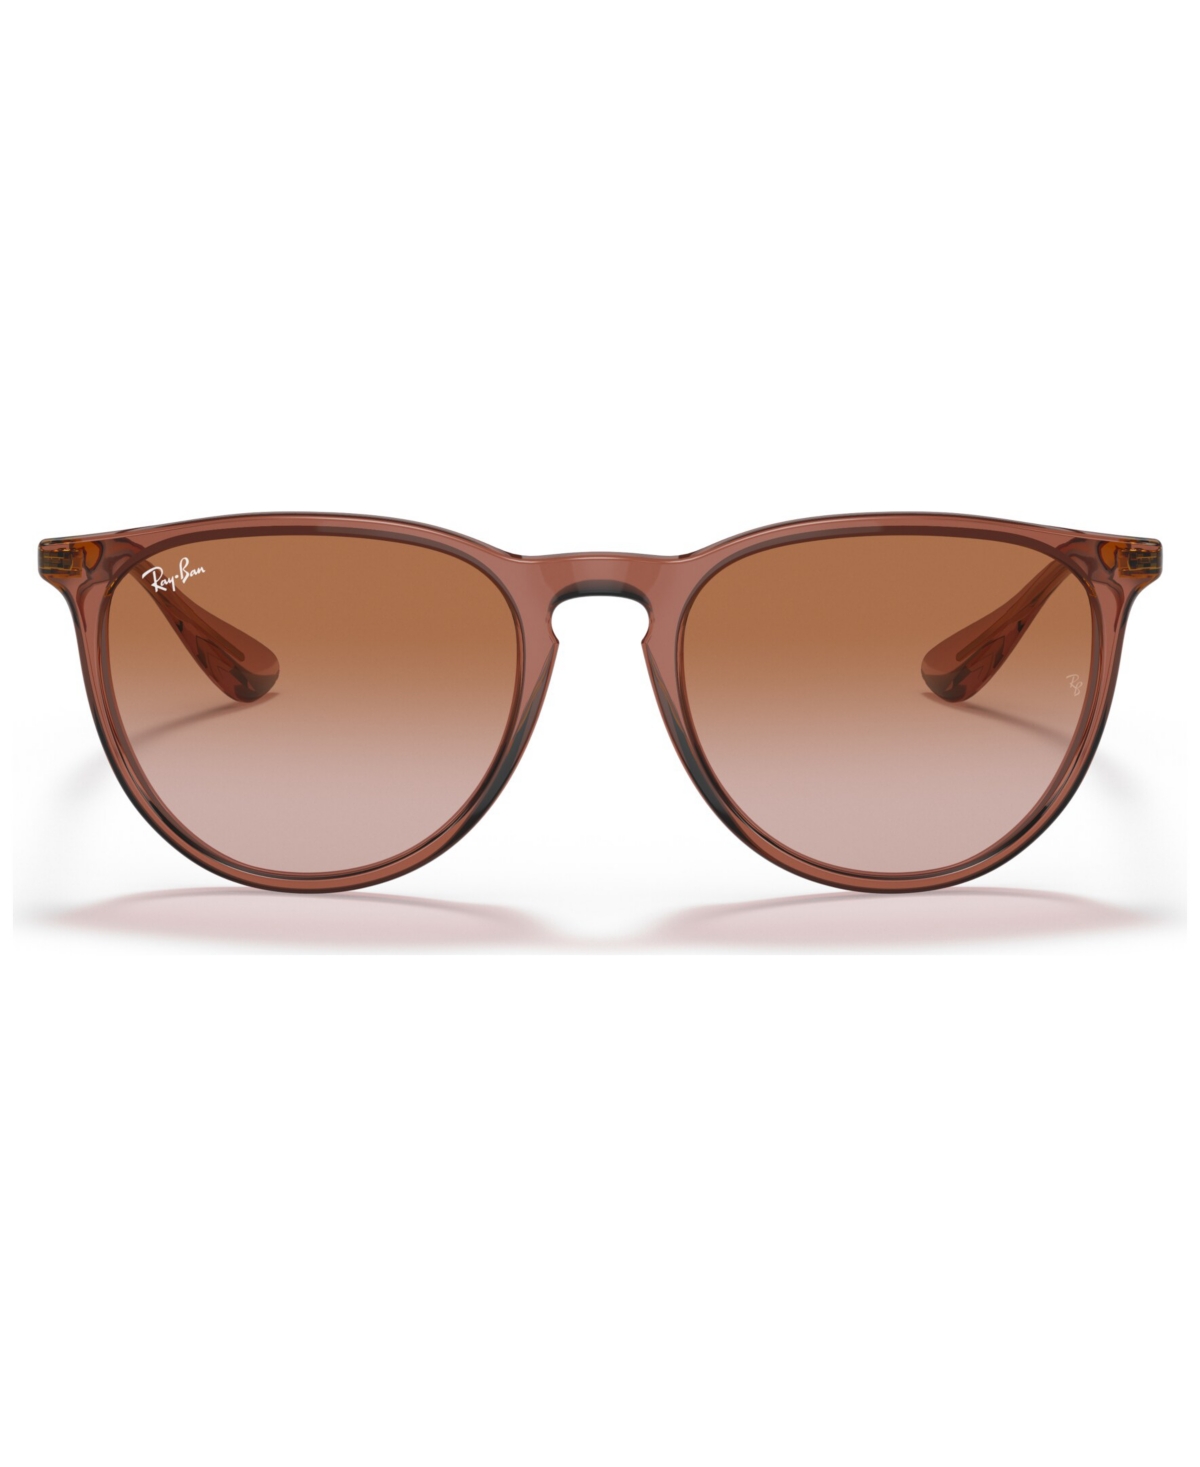 Shop Ray Ban Women's Sunglasses, Erika Classic In Transparent Light Brown